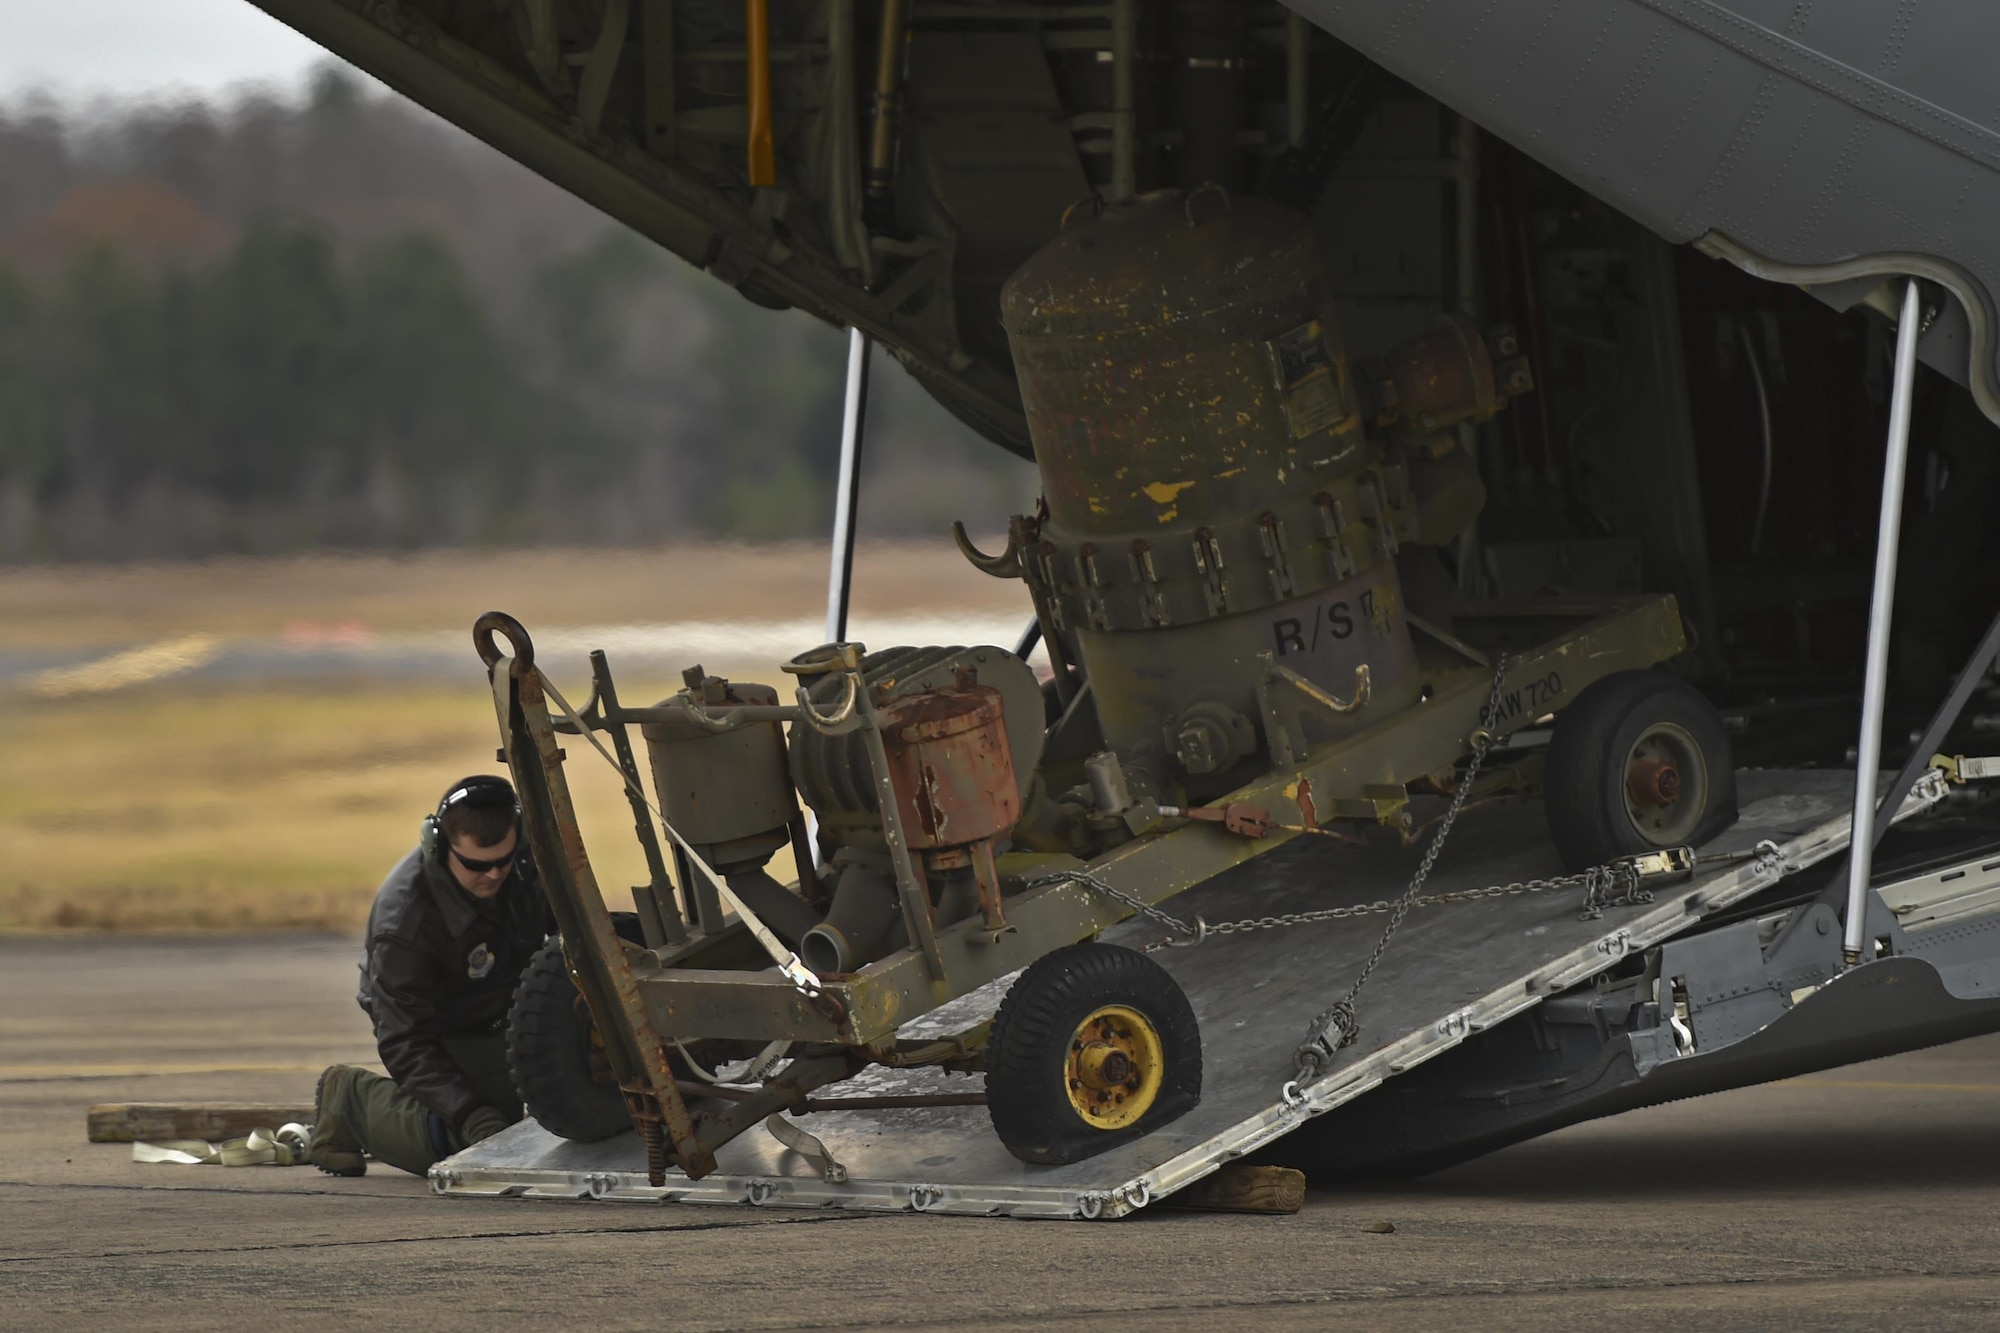 U.S. Air Force Staff Sgt. Casey Strauss, 61st Airlift Squadron C-130J loadmaster, simulates a Method A Combat Offload of a fuel filter separator during a deployment training exercise Dec 7, 2016 at Little Rock Air Force Base, Ark. Method A Combat Offloads are often utilized in locations where there are no vehicles or equipment to assist in offloading supplies. (U.S Air Force photo by Senior Airman Harry Brexel)